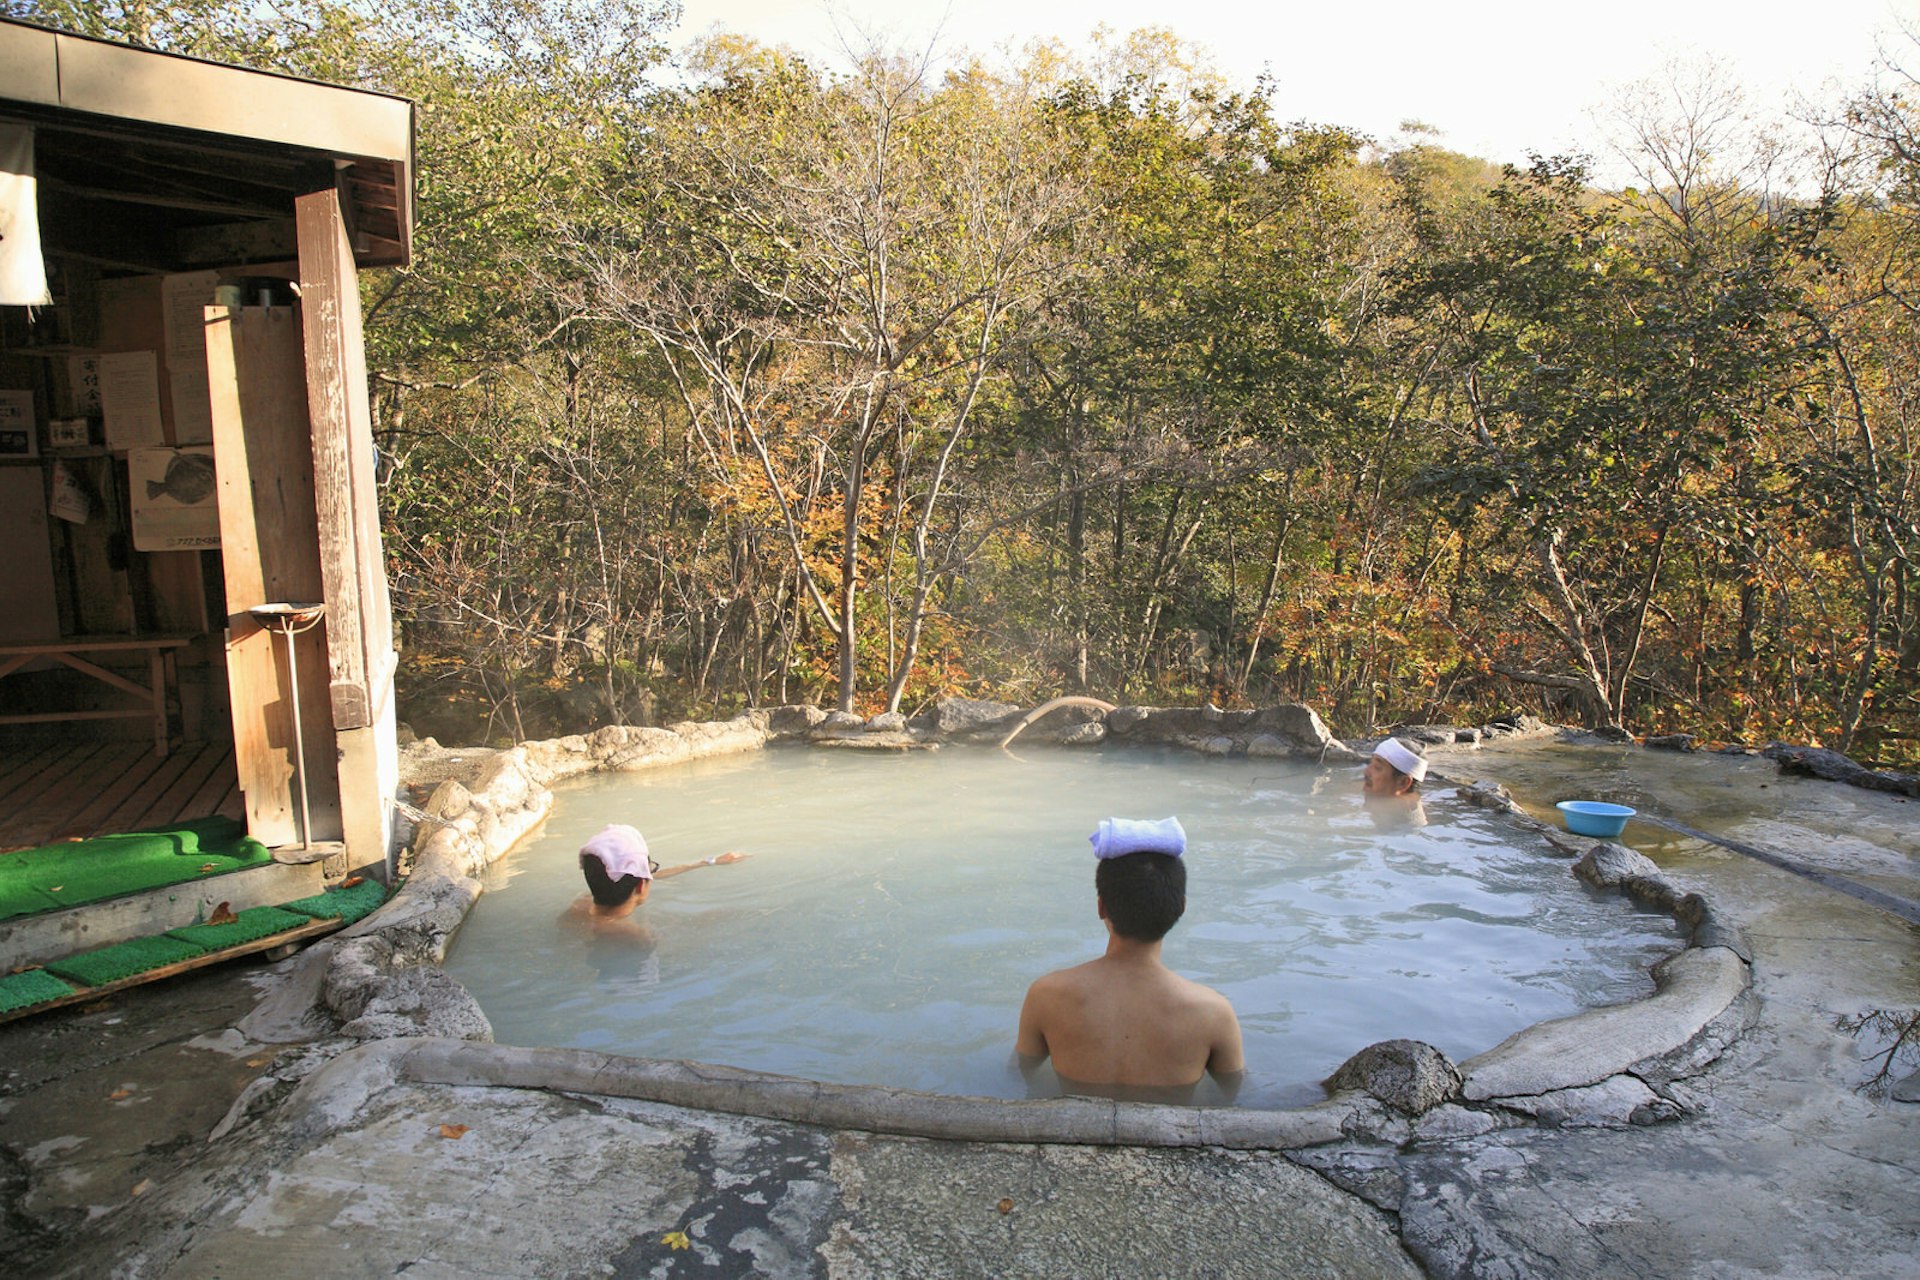 Three people sitting in the Kuma-no-yu hot spring, looking out onto a wooded area